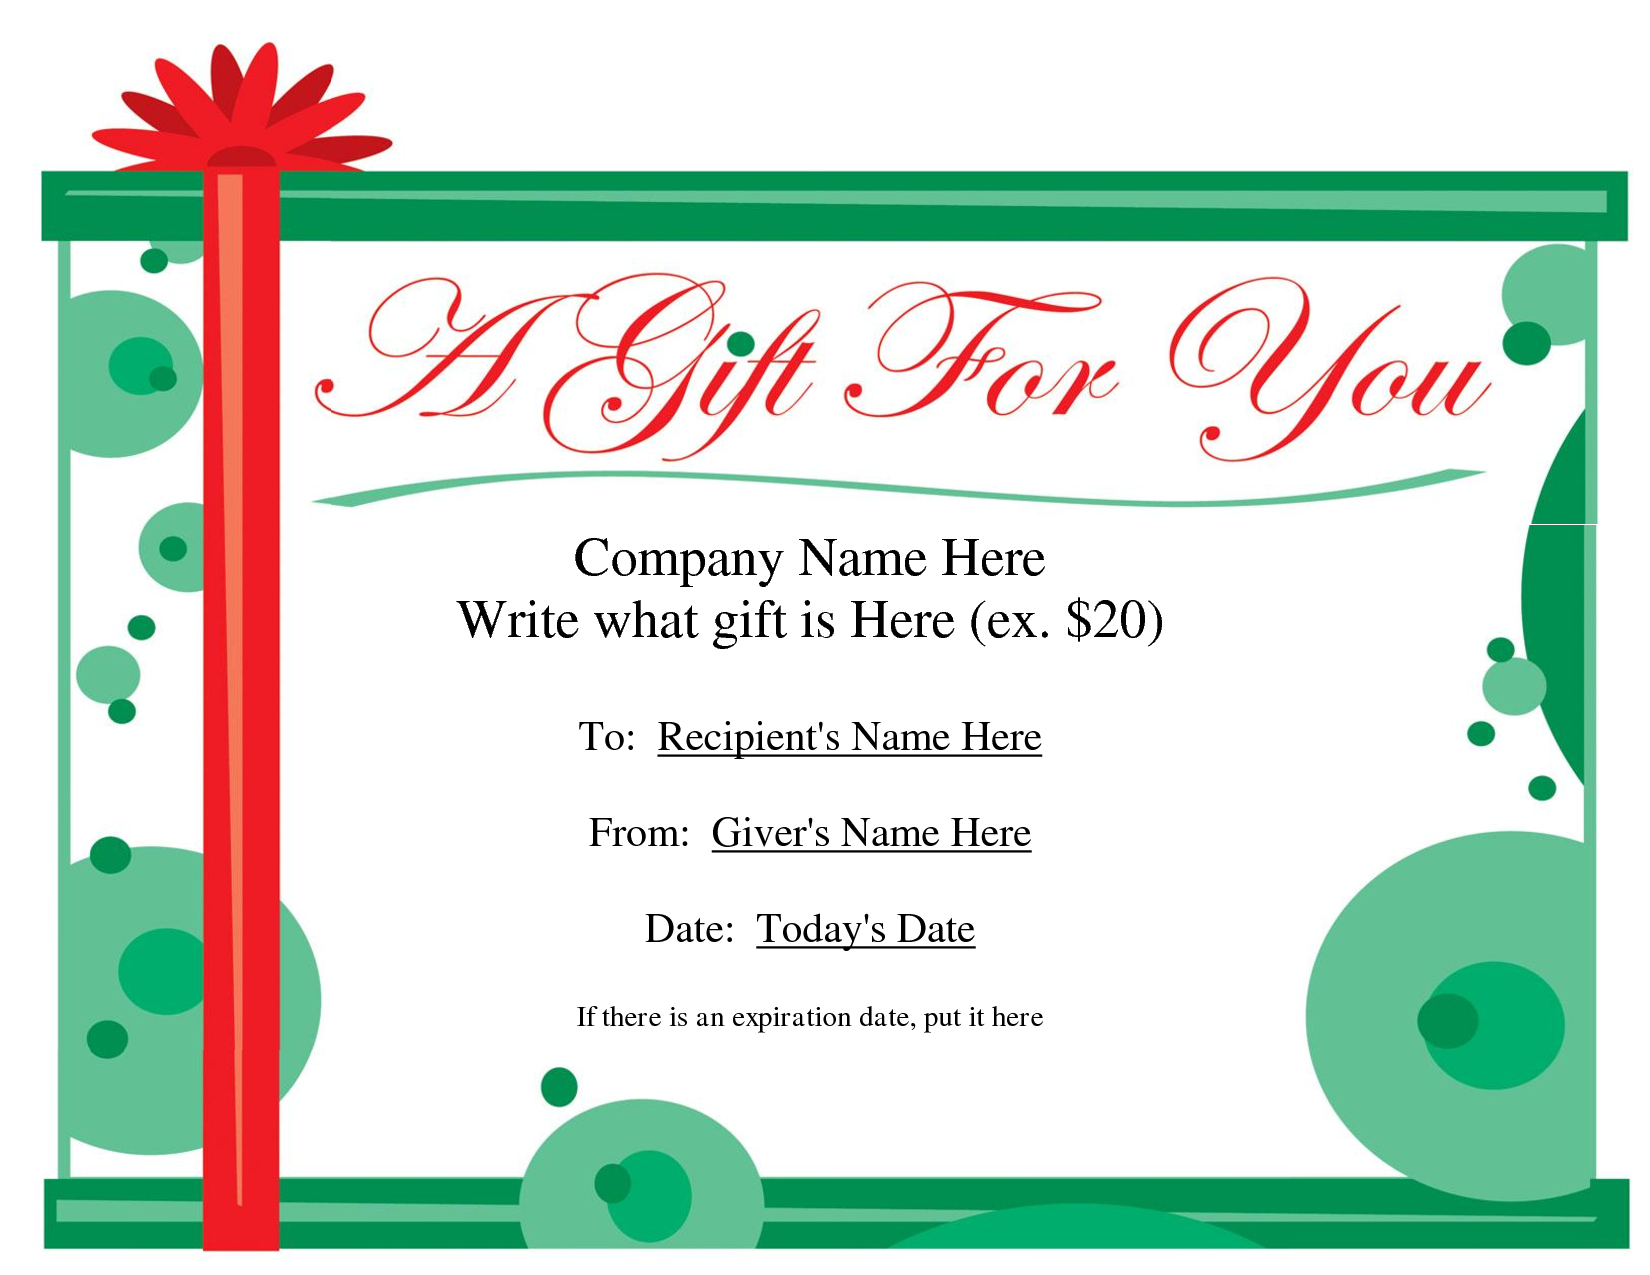 Free Christmas Gift Certificate Templates | Ideas For The House - Free Printable Christmas Gift Cards